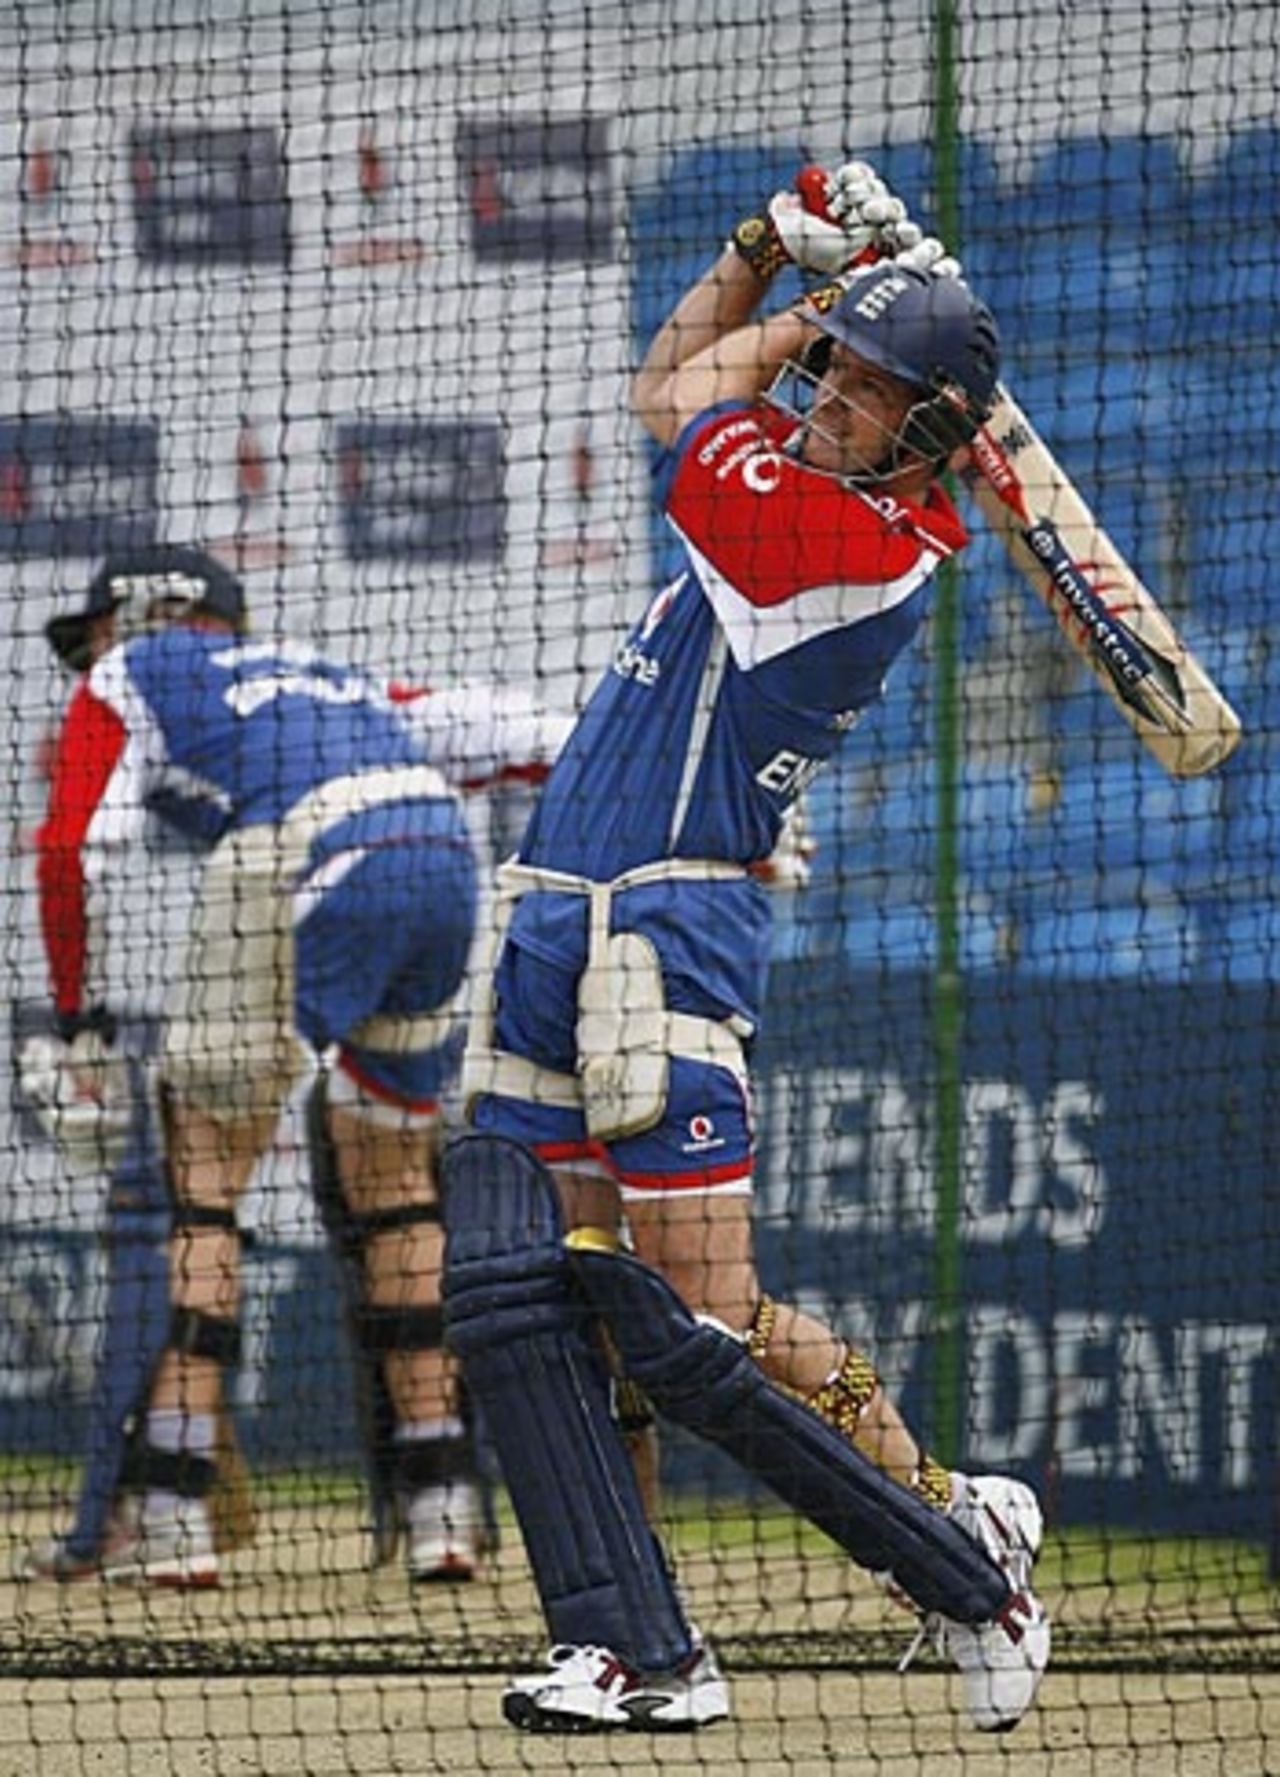 Aggressive intent: Andrew Strauss clobbers one over the top ahead of tomorrow's final one-dayer at Headingley, June 30, 2006